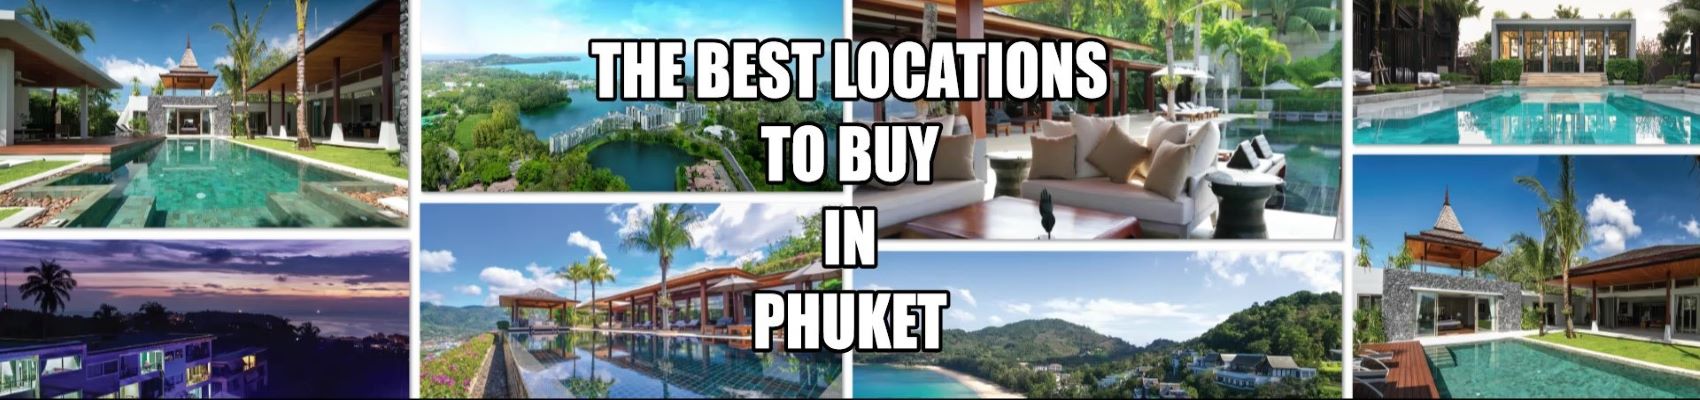 Best locations for phuket property